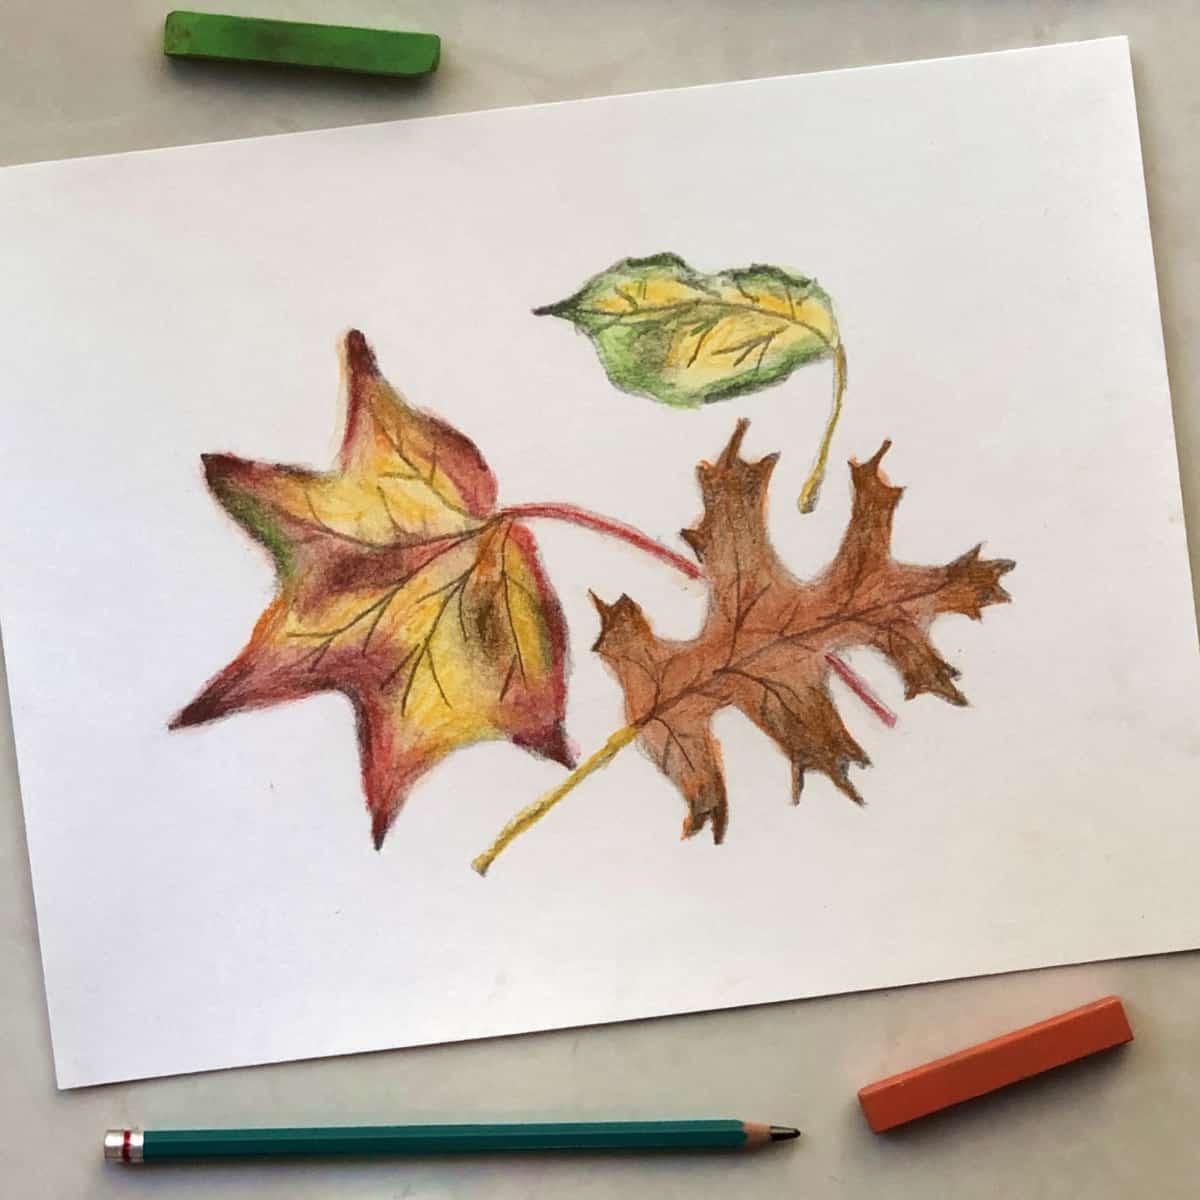 Colorful fall leaf drawing created with pencil and soft pastels next to a drawing pencil and orange and green soft pastel sticks.